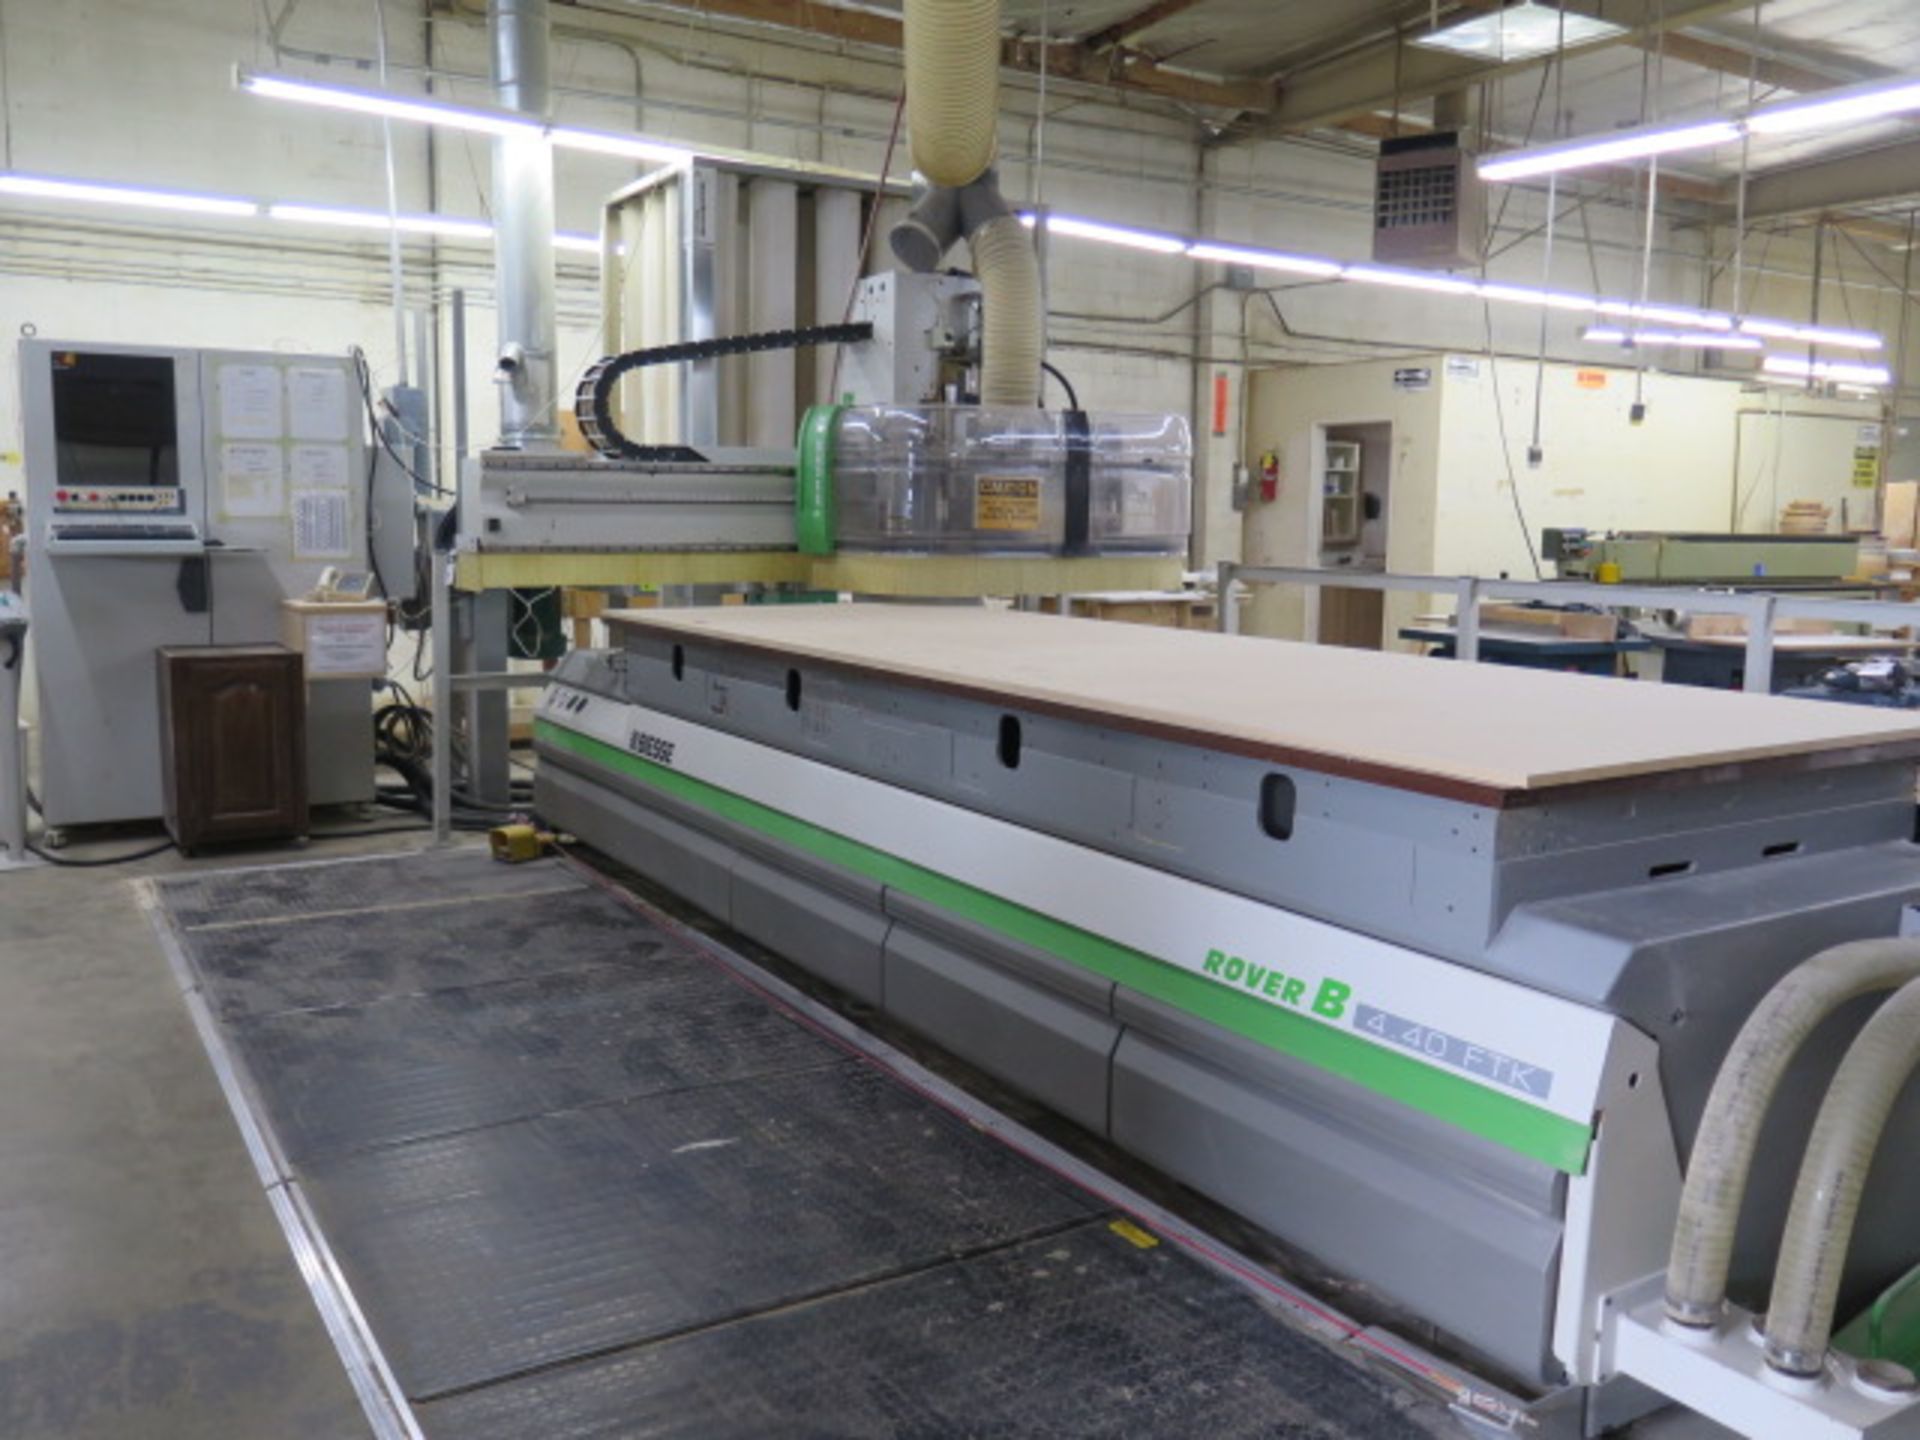 2006 Biesse Rover B4.40 FT-K 16-Spindle CNC Router s/n 59006 w/ Biesse CNC Controls, SOLD AS IS